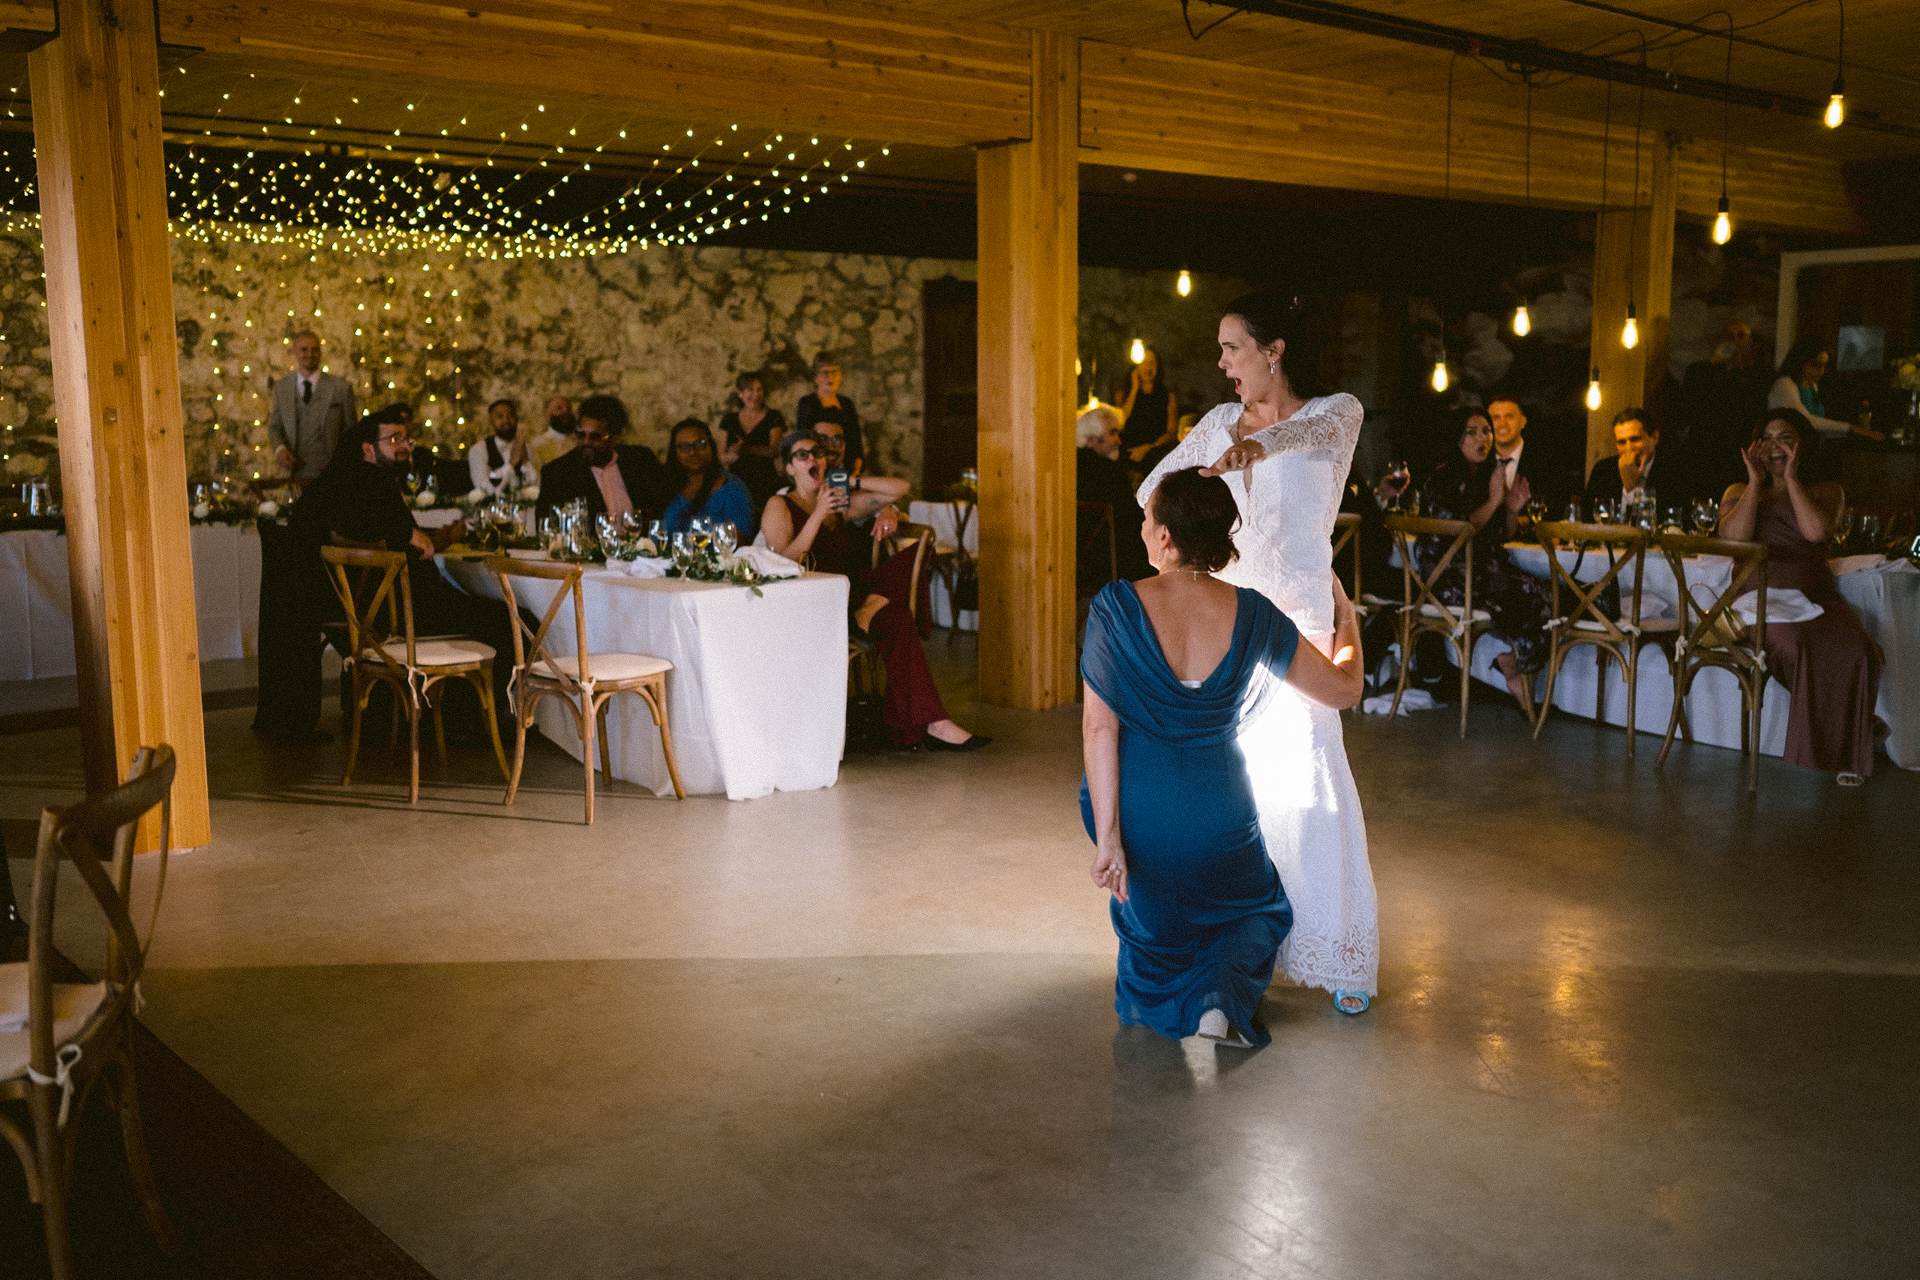 Bride and her mother performed the parent dance to the guests in a wedding at Cambium Farms.